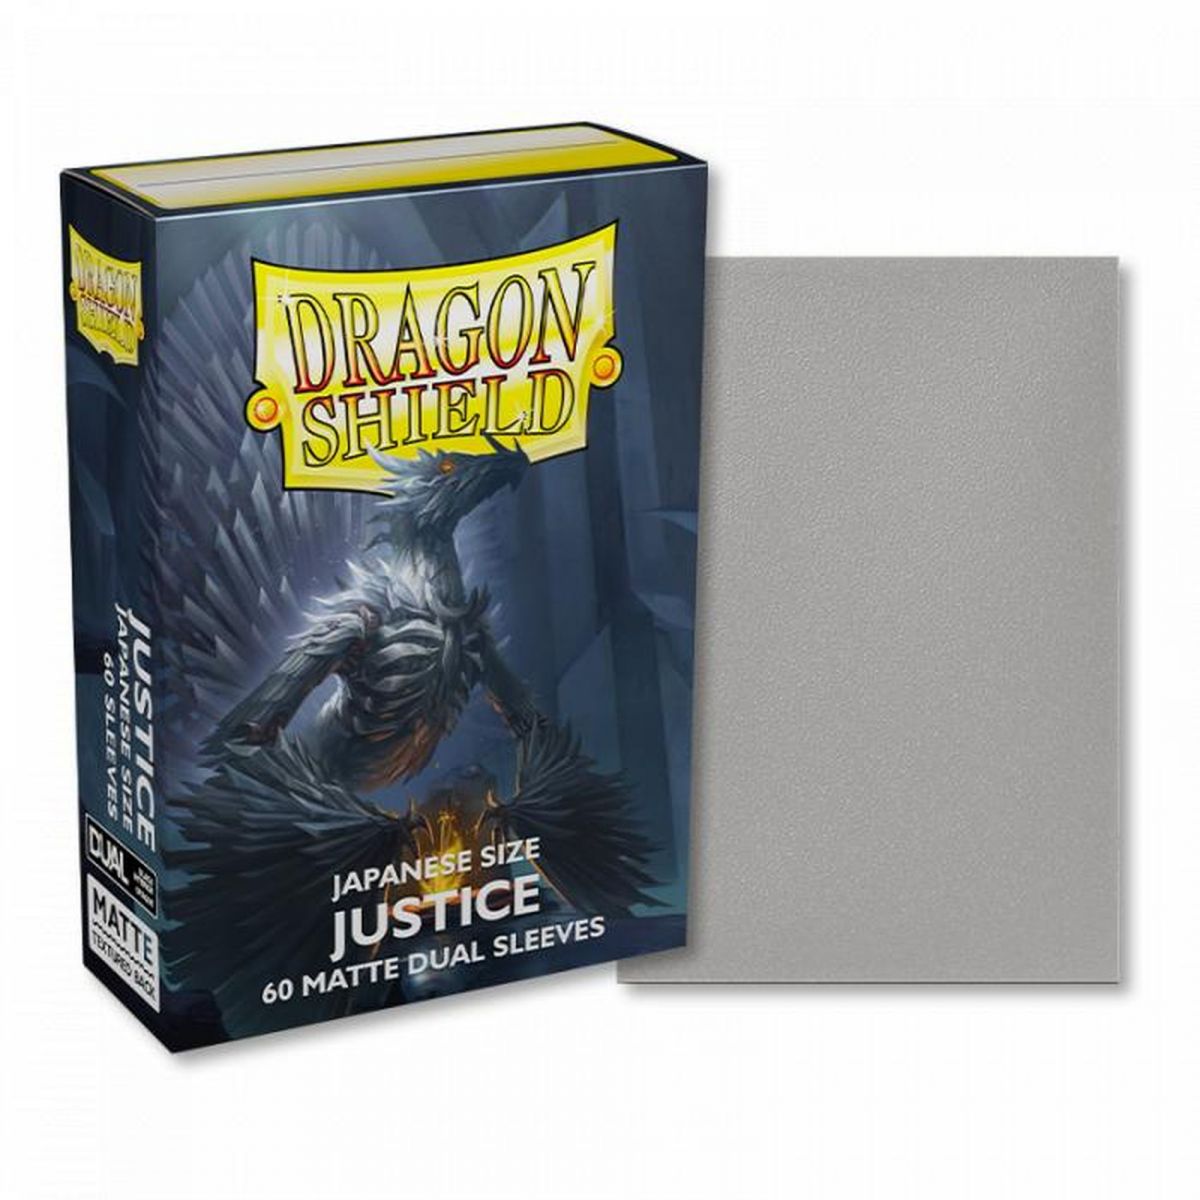 Dragon Shield - Small Sleeves - Japanese Size - Dual Matte Justice (60)